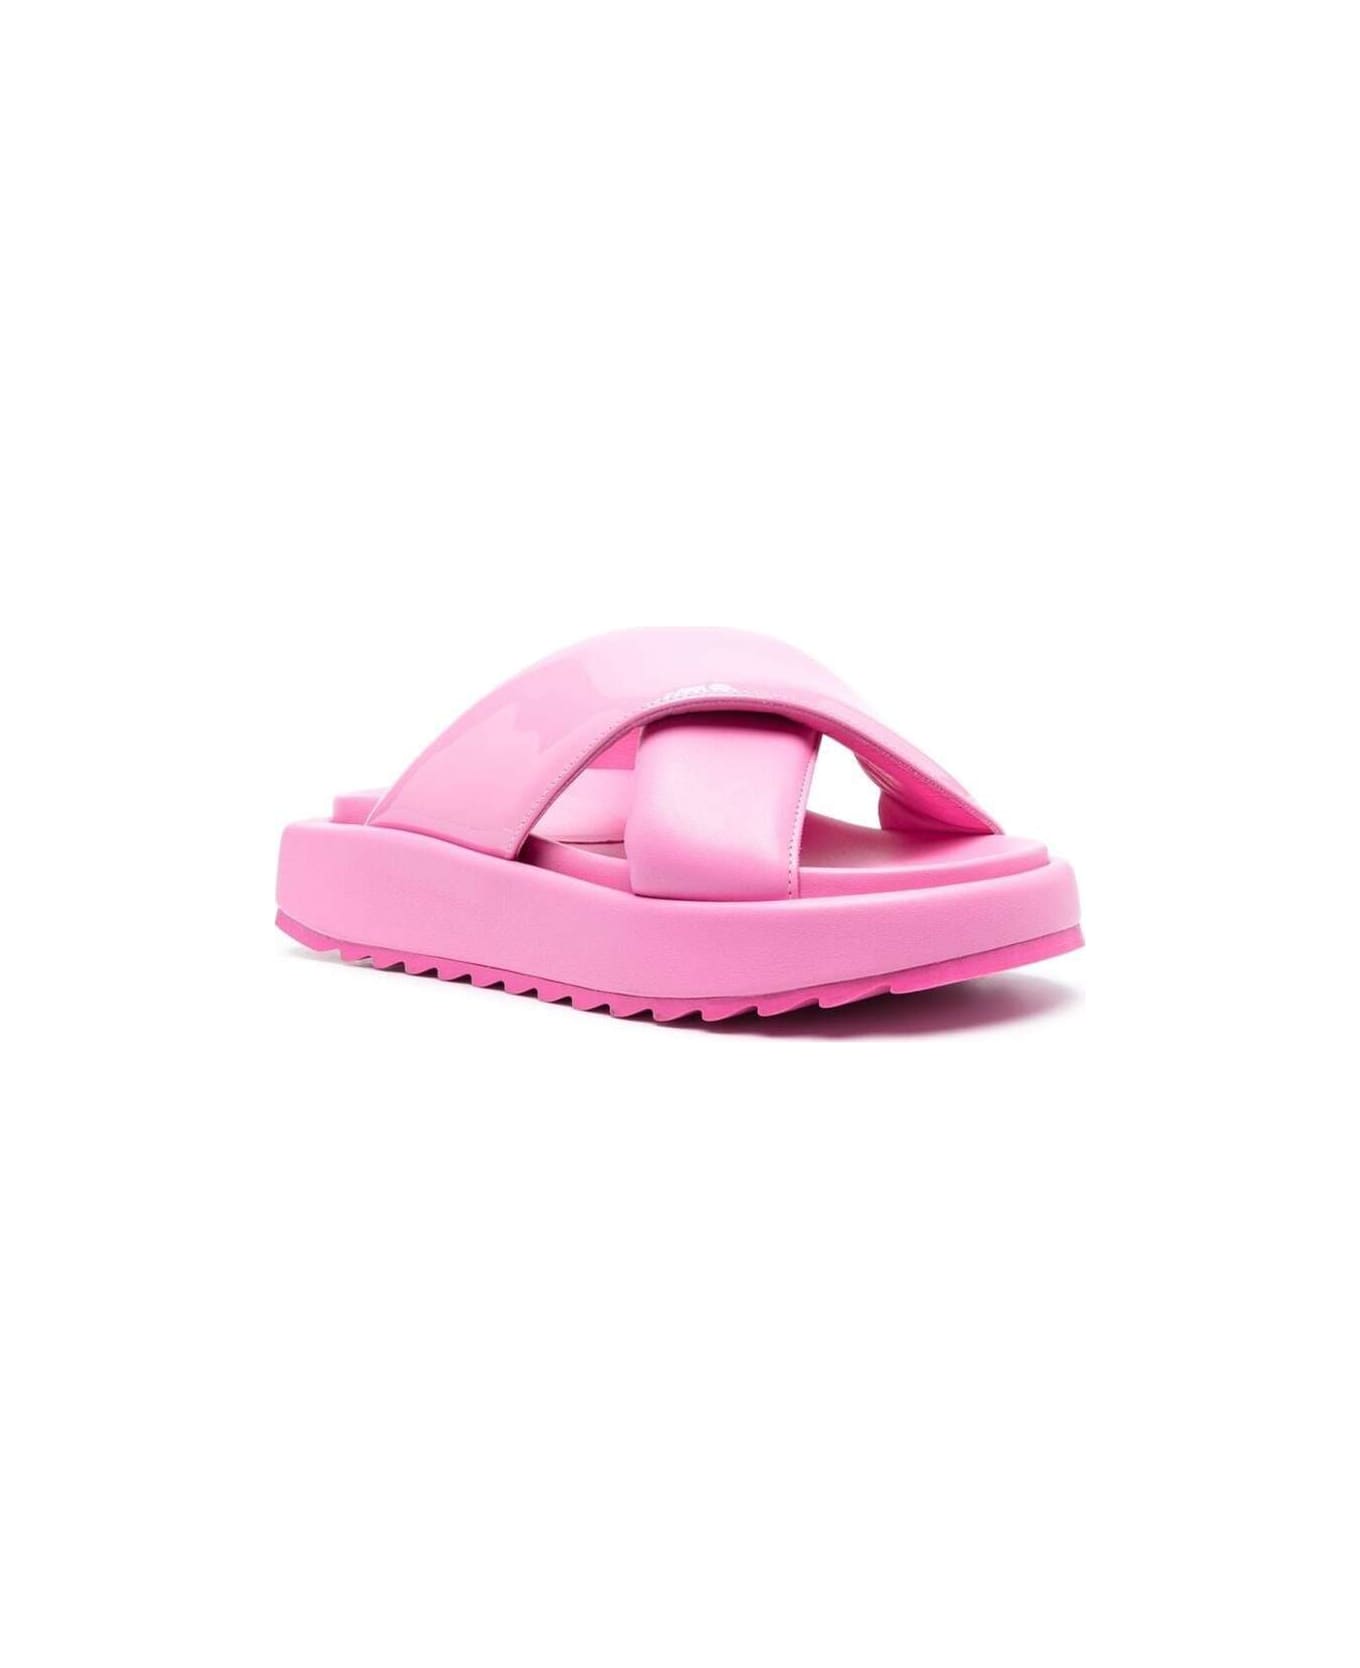 GIA BORGHINI Pink Crossover Strap Slides Glossy Finish In Leather Woman - Pink サンダル